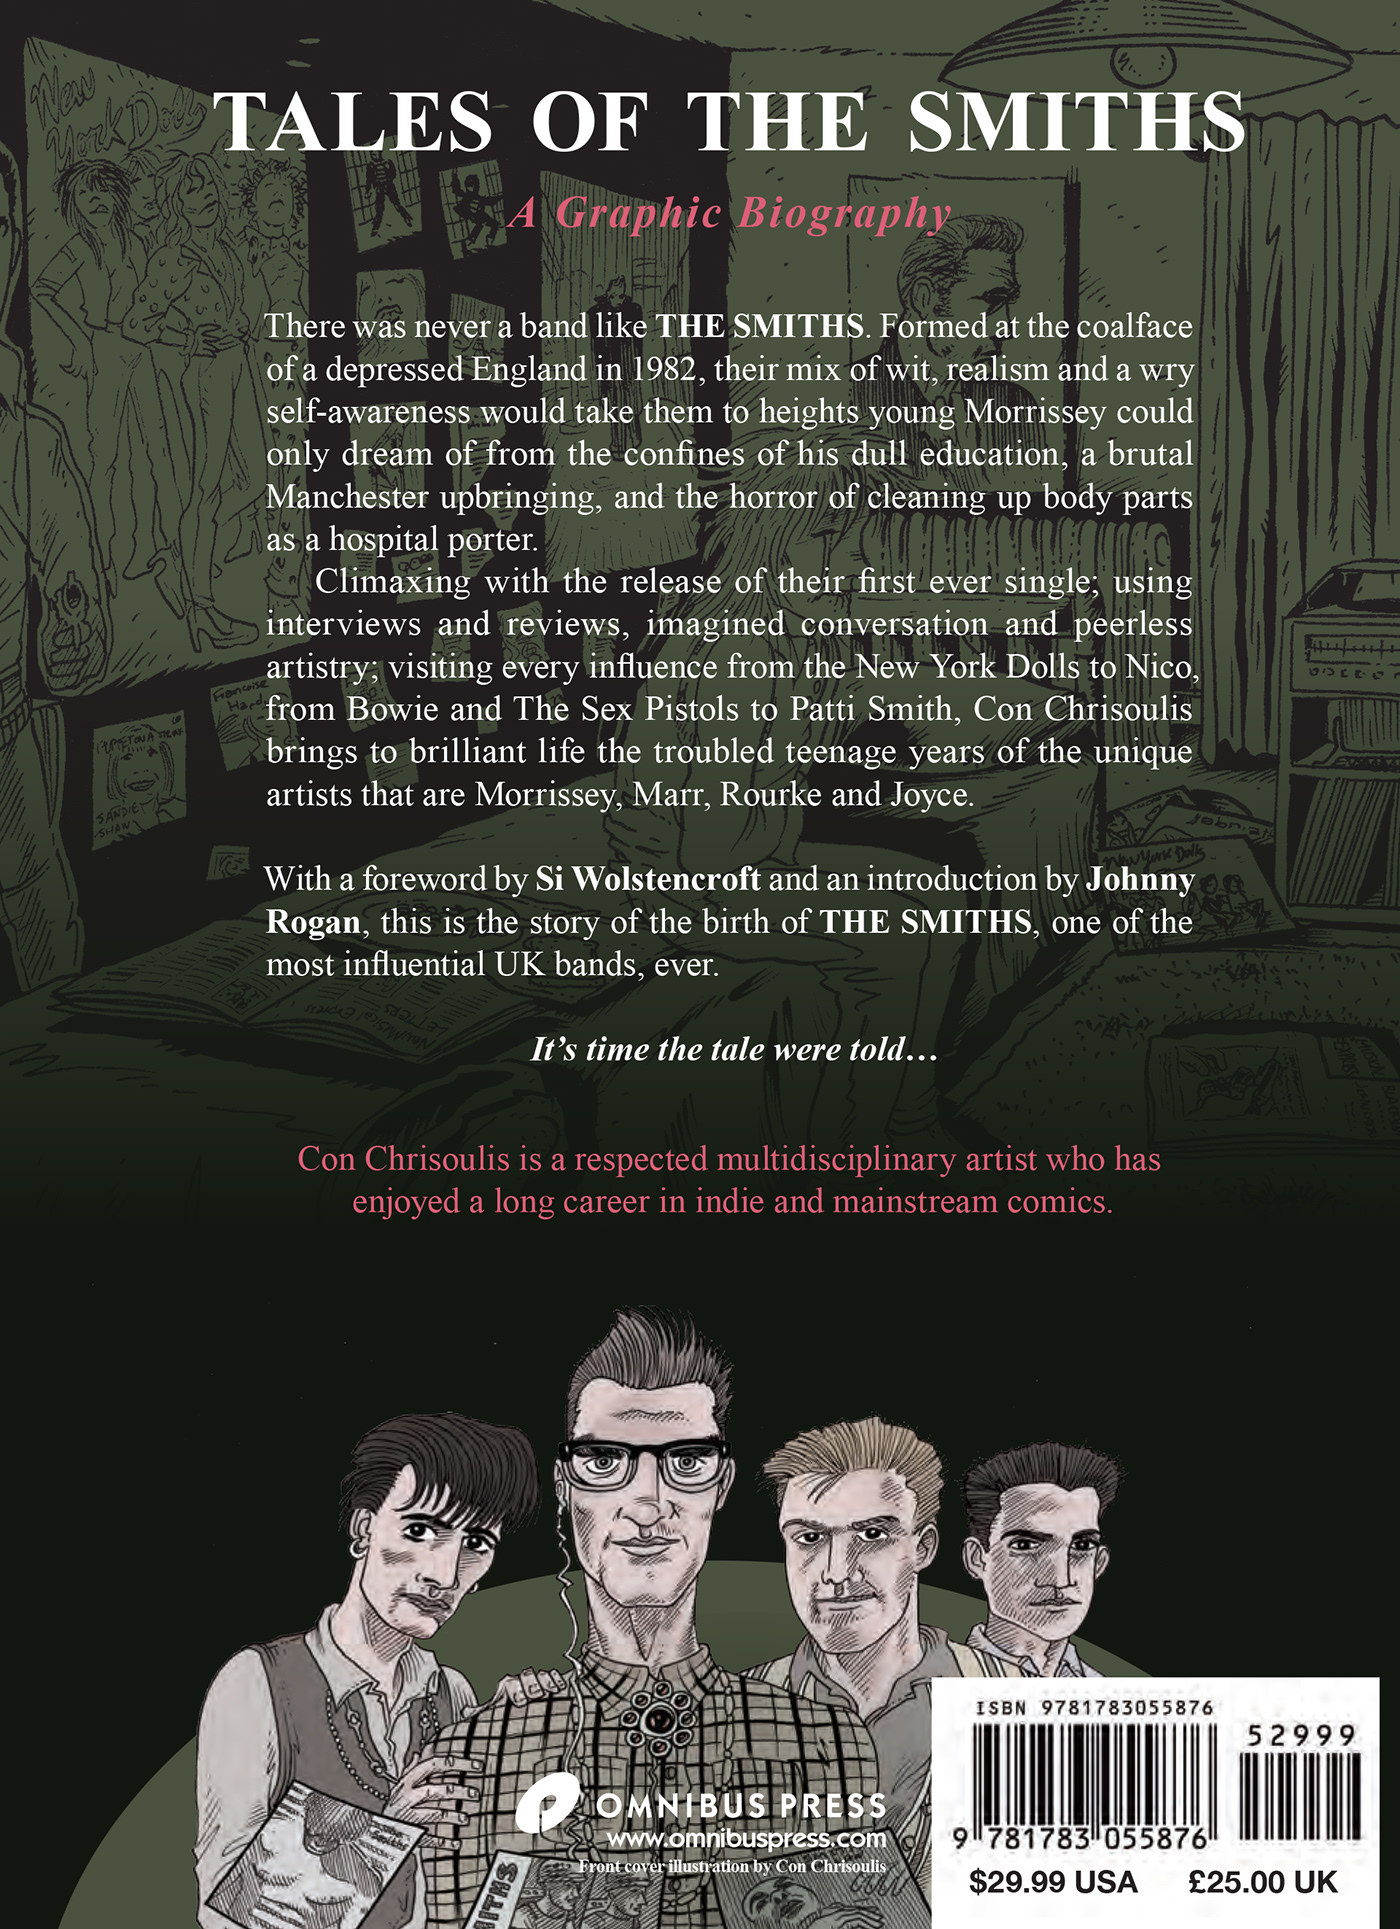 biography Graphic Novel indie indie music johnny marr manchester morrissey music smiths the smiths